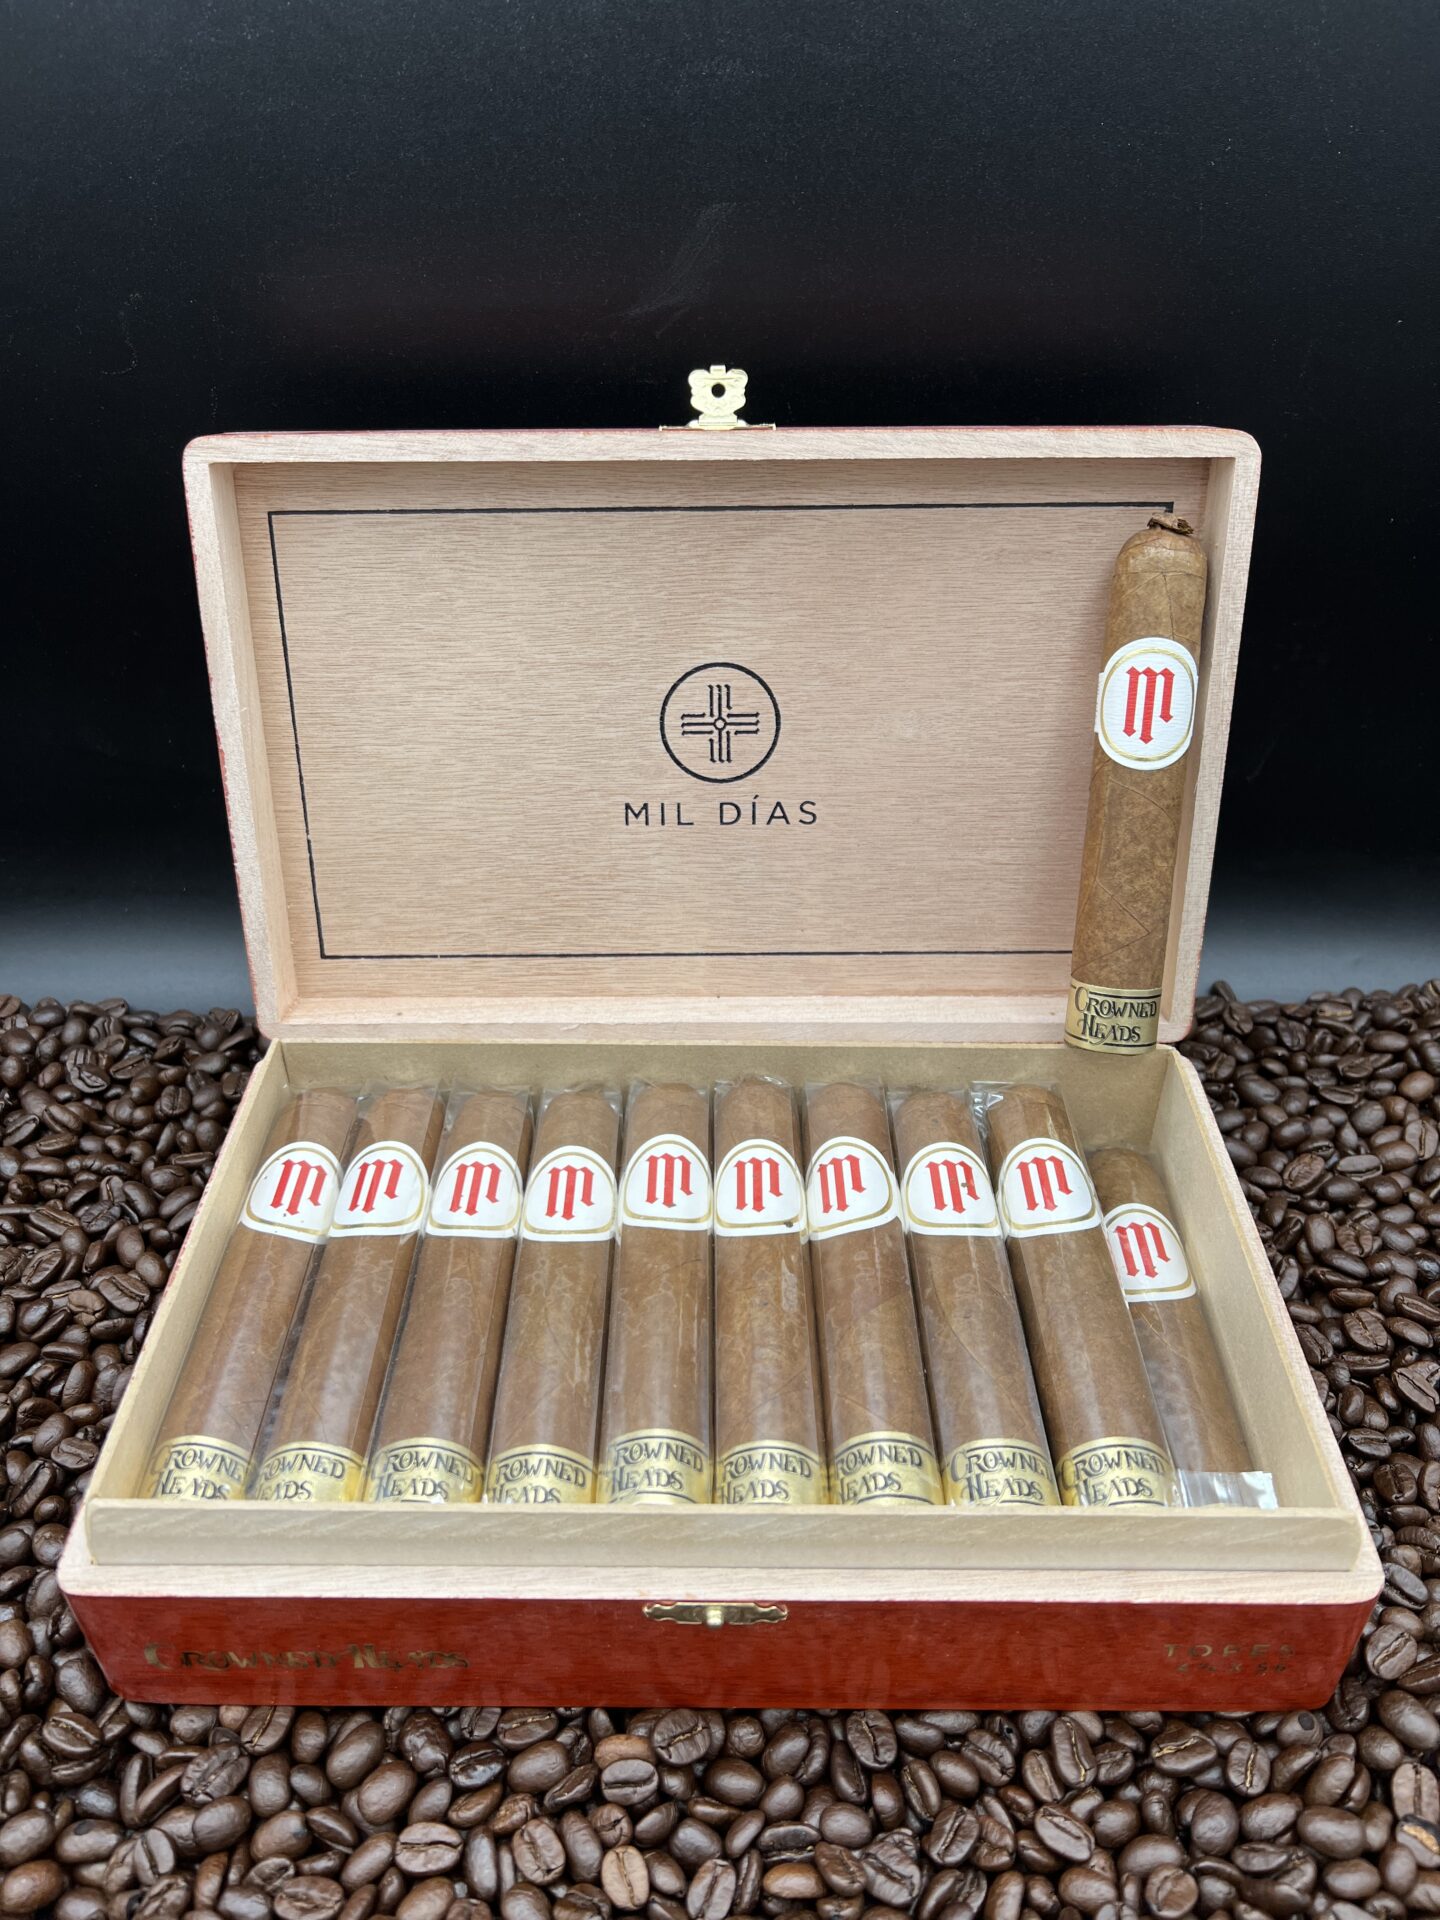 Crowned Heads - Mil Dias Topes cigars supplied by Sir Louis Cigars